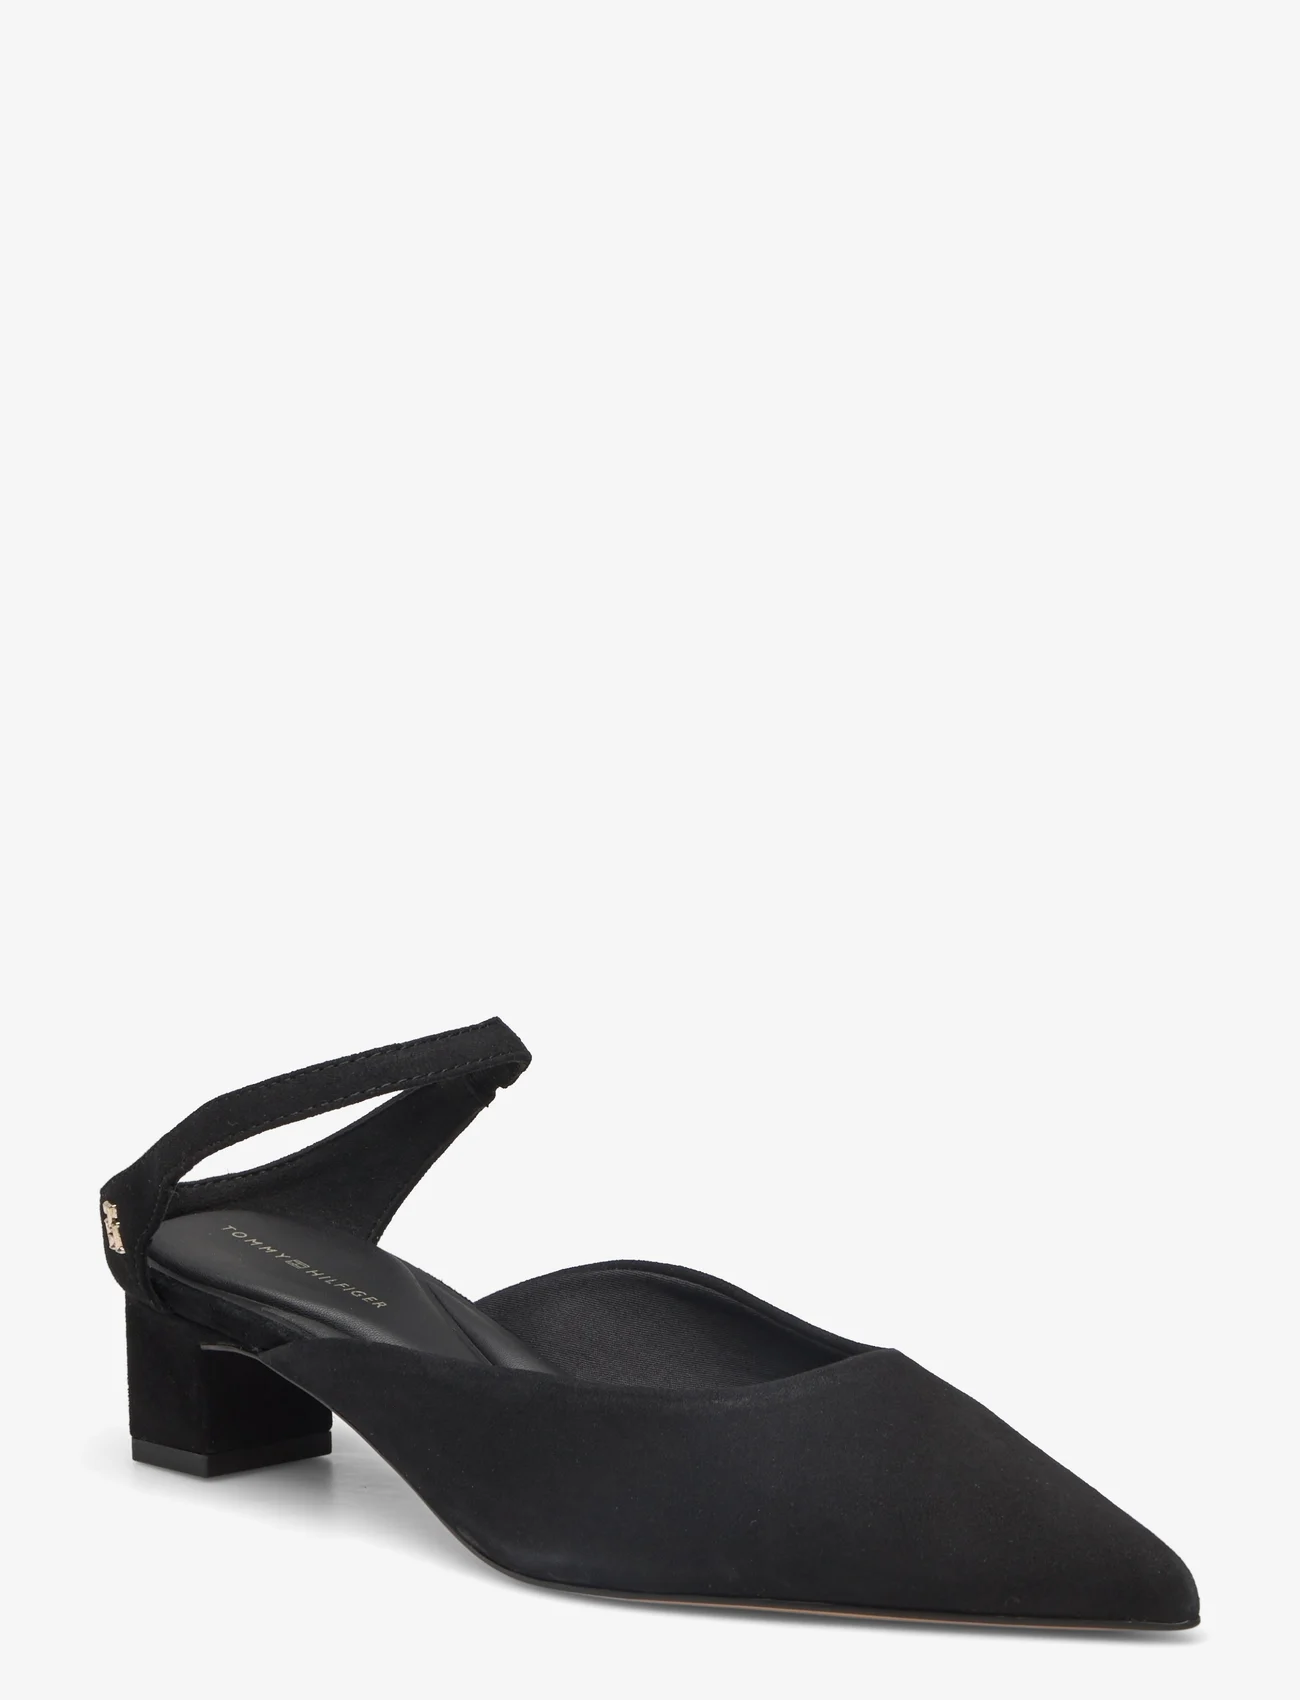 Tommy Hilfiger - TH POINTY MID HEEL LEATHER MULE - festmode zu outlet-preisen - black - 0